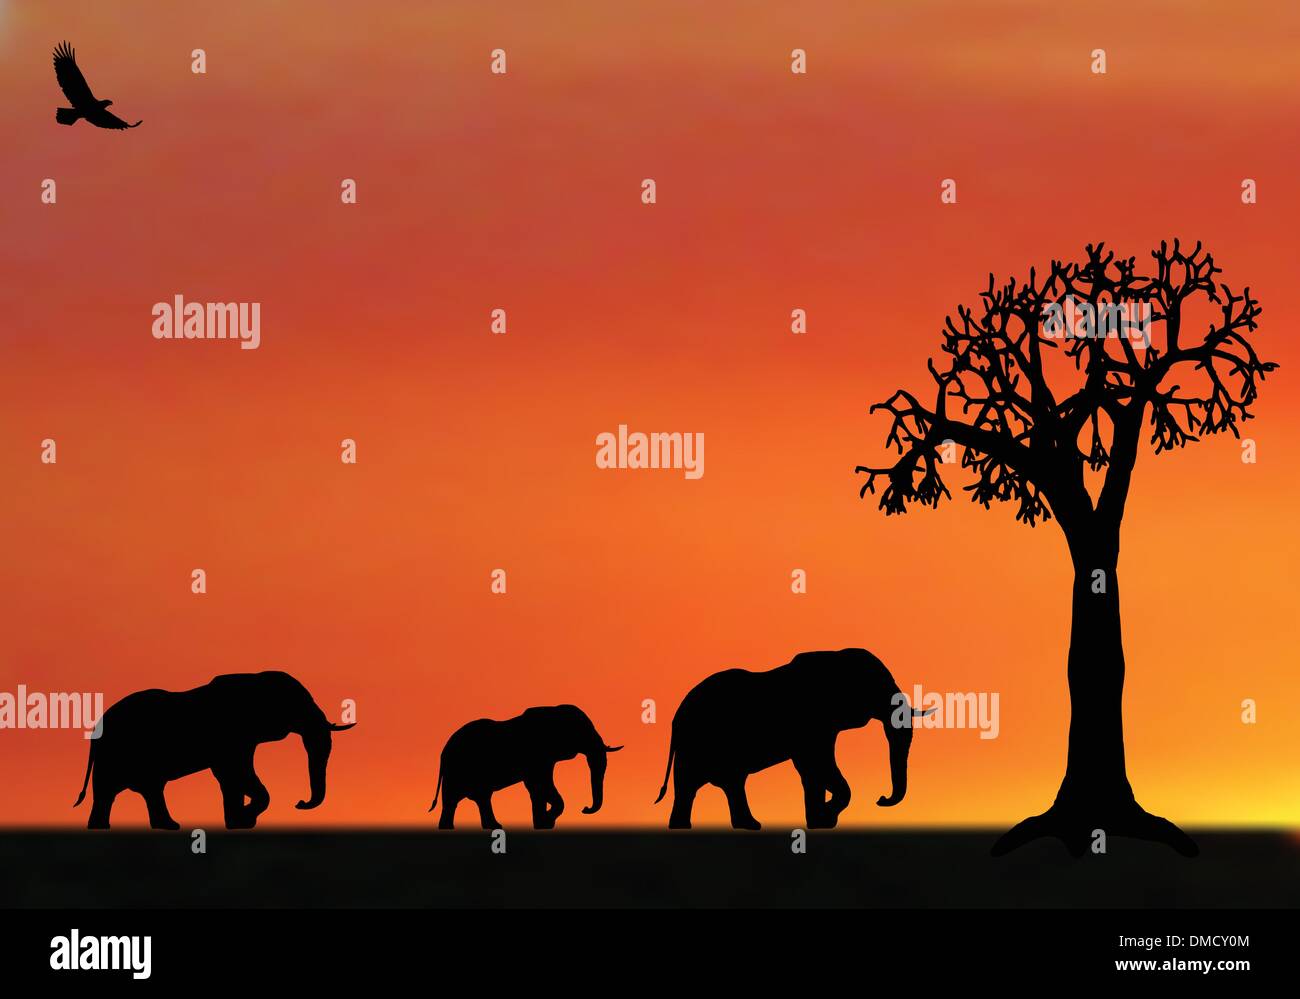 illustraion of elephants in sunset in africa Stock Vector